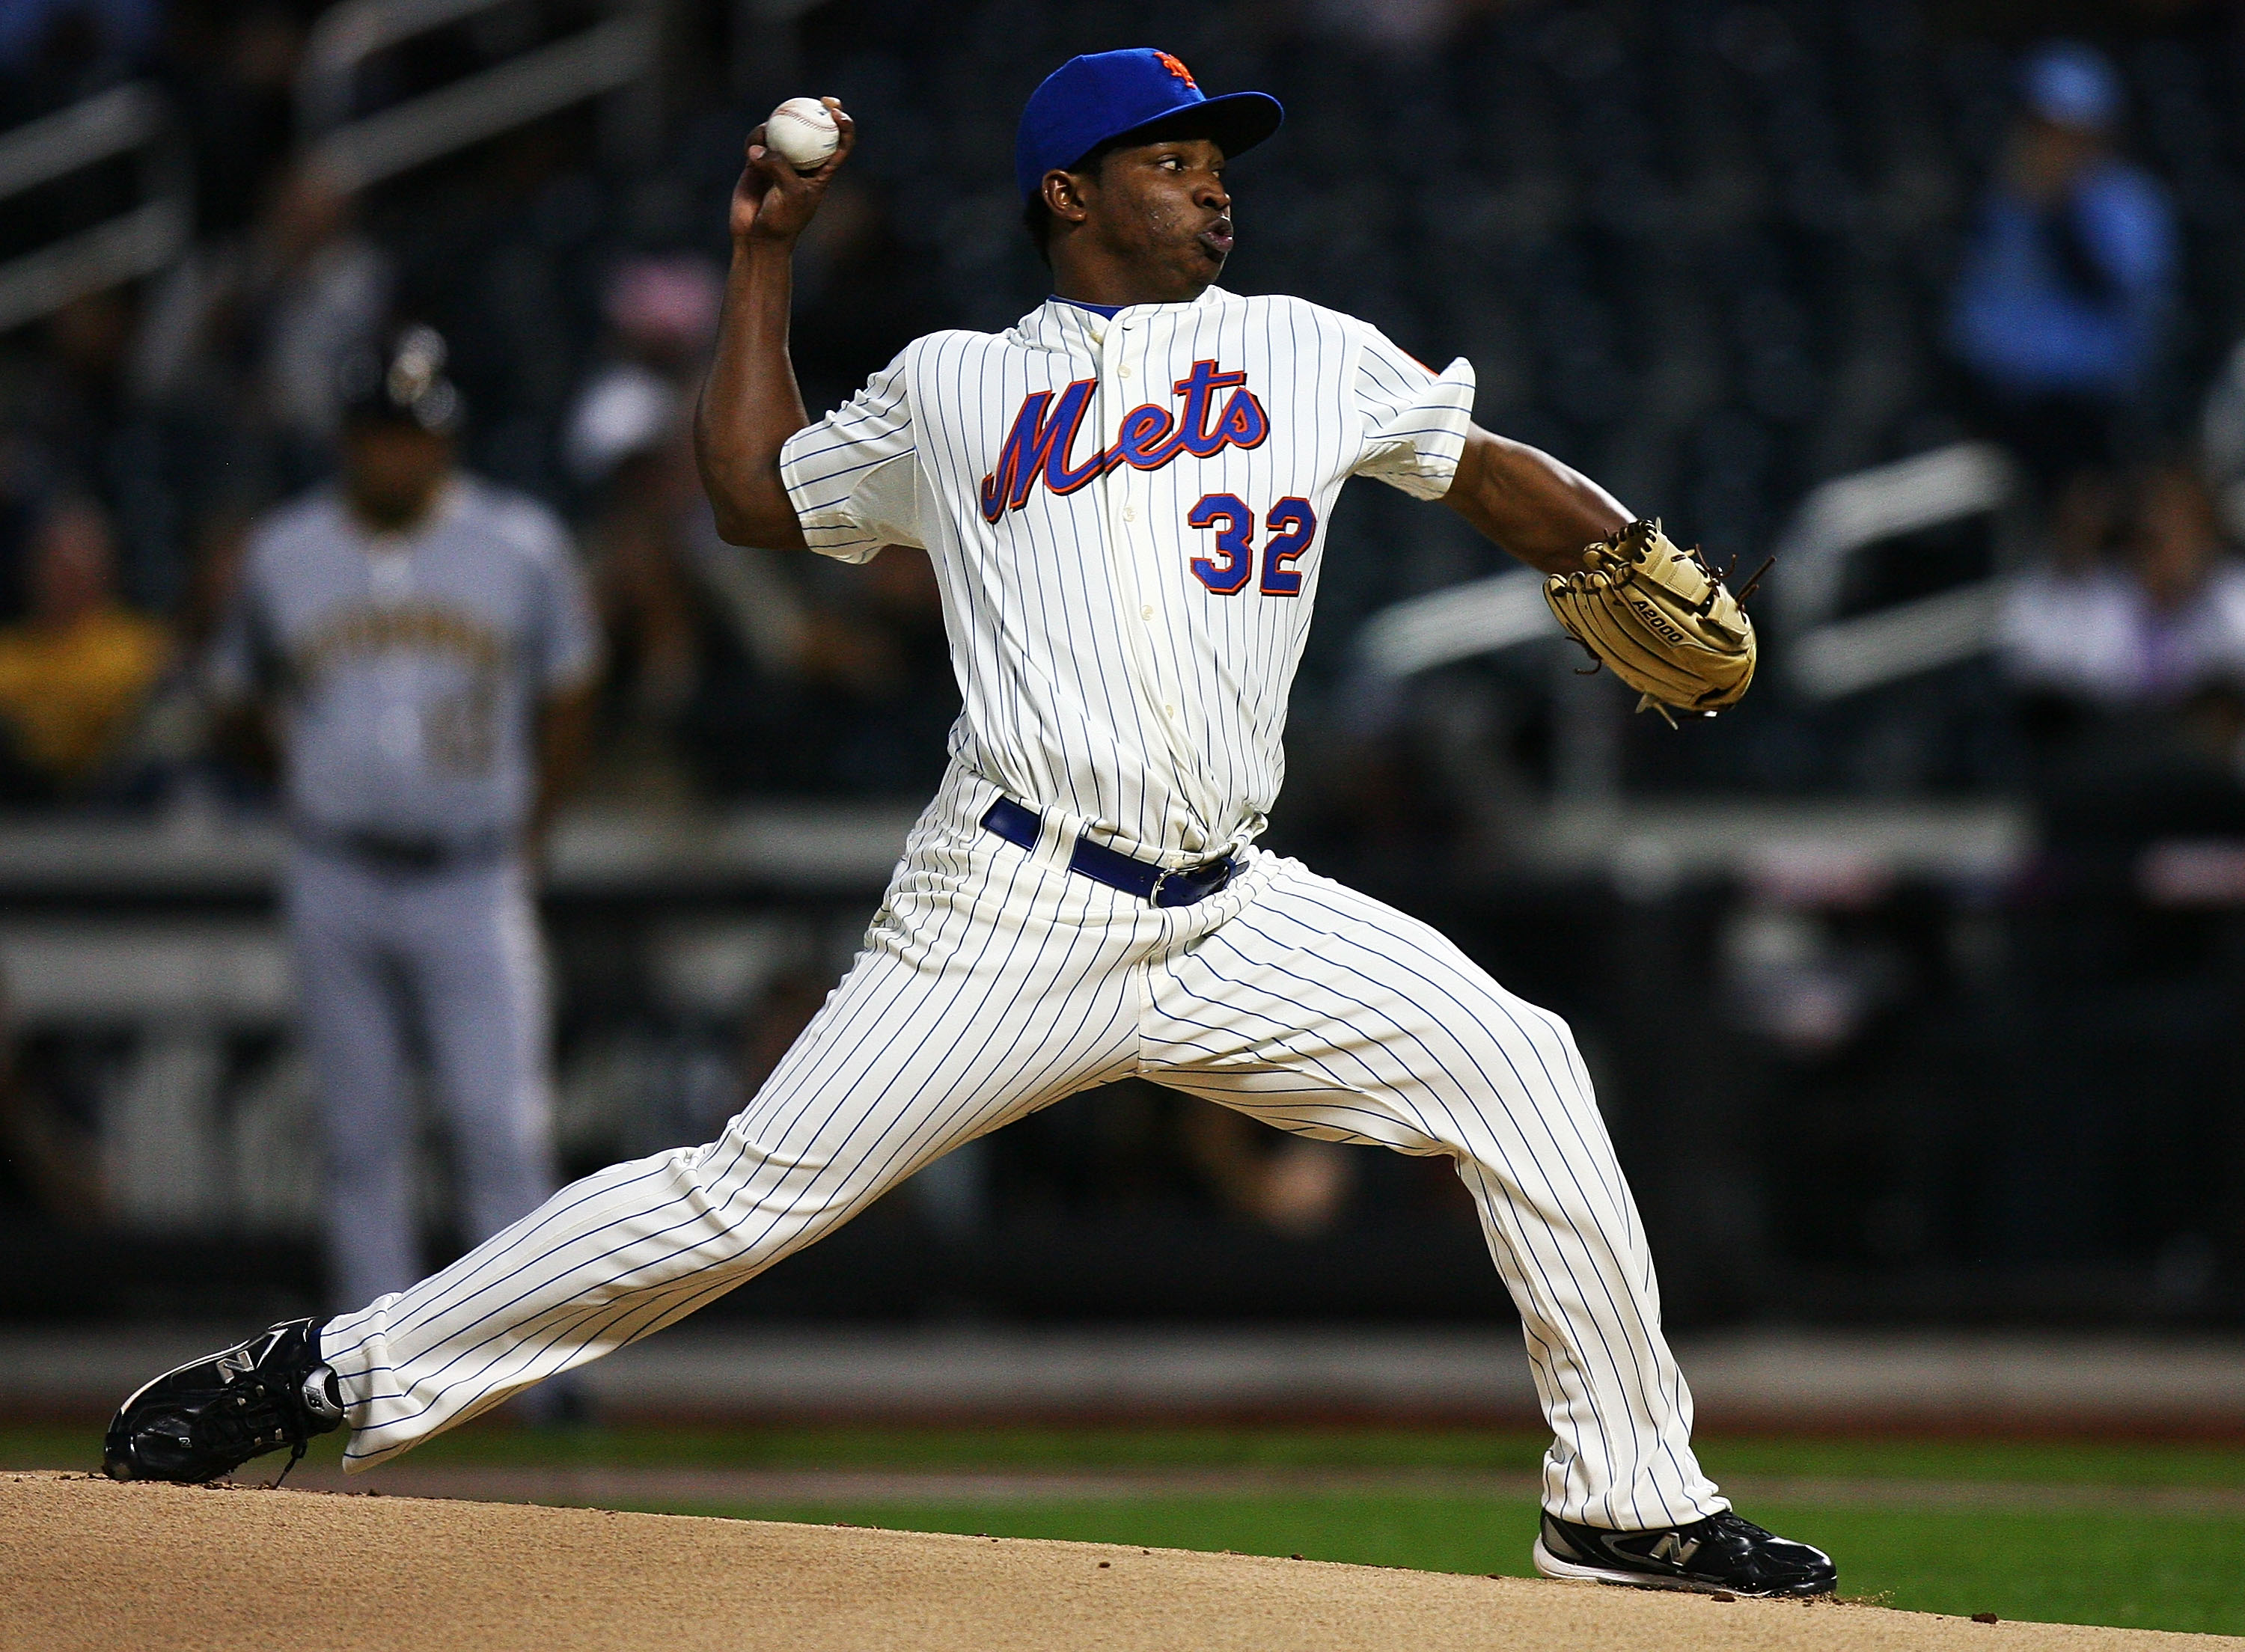 NEW YORK - SEPTEMBER 15:  Jenrry Mejia #32 of the New York Mets pitches against the Pittsburgh Pirates on September 15, 2010 at Citi Field in the Flushing neighborhood of the Queens borough of New York City.  (Photo by Andrew Burton/Getty Images)